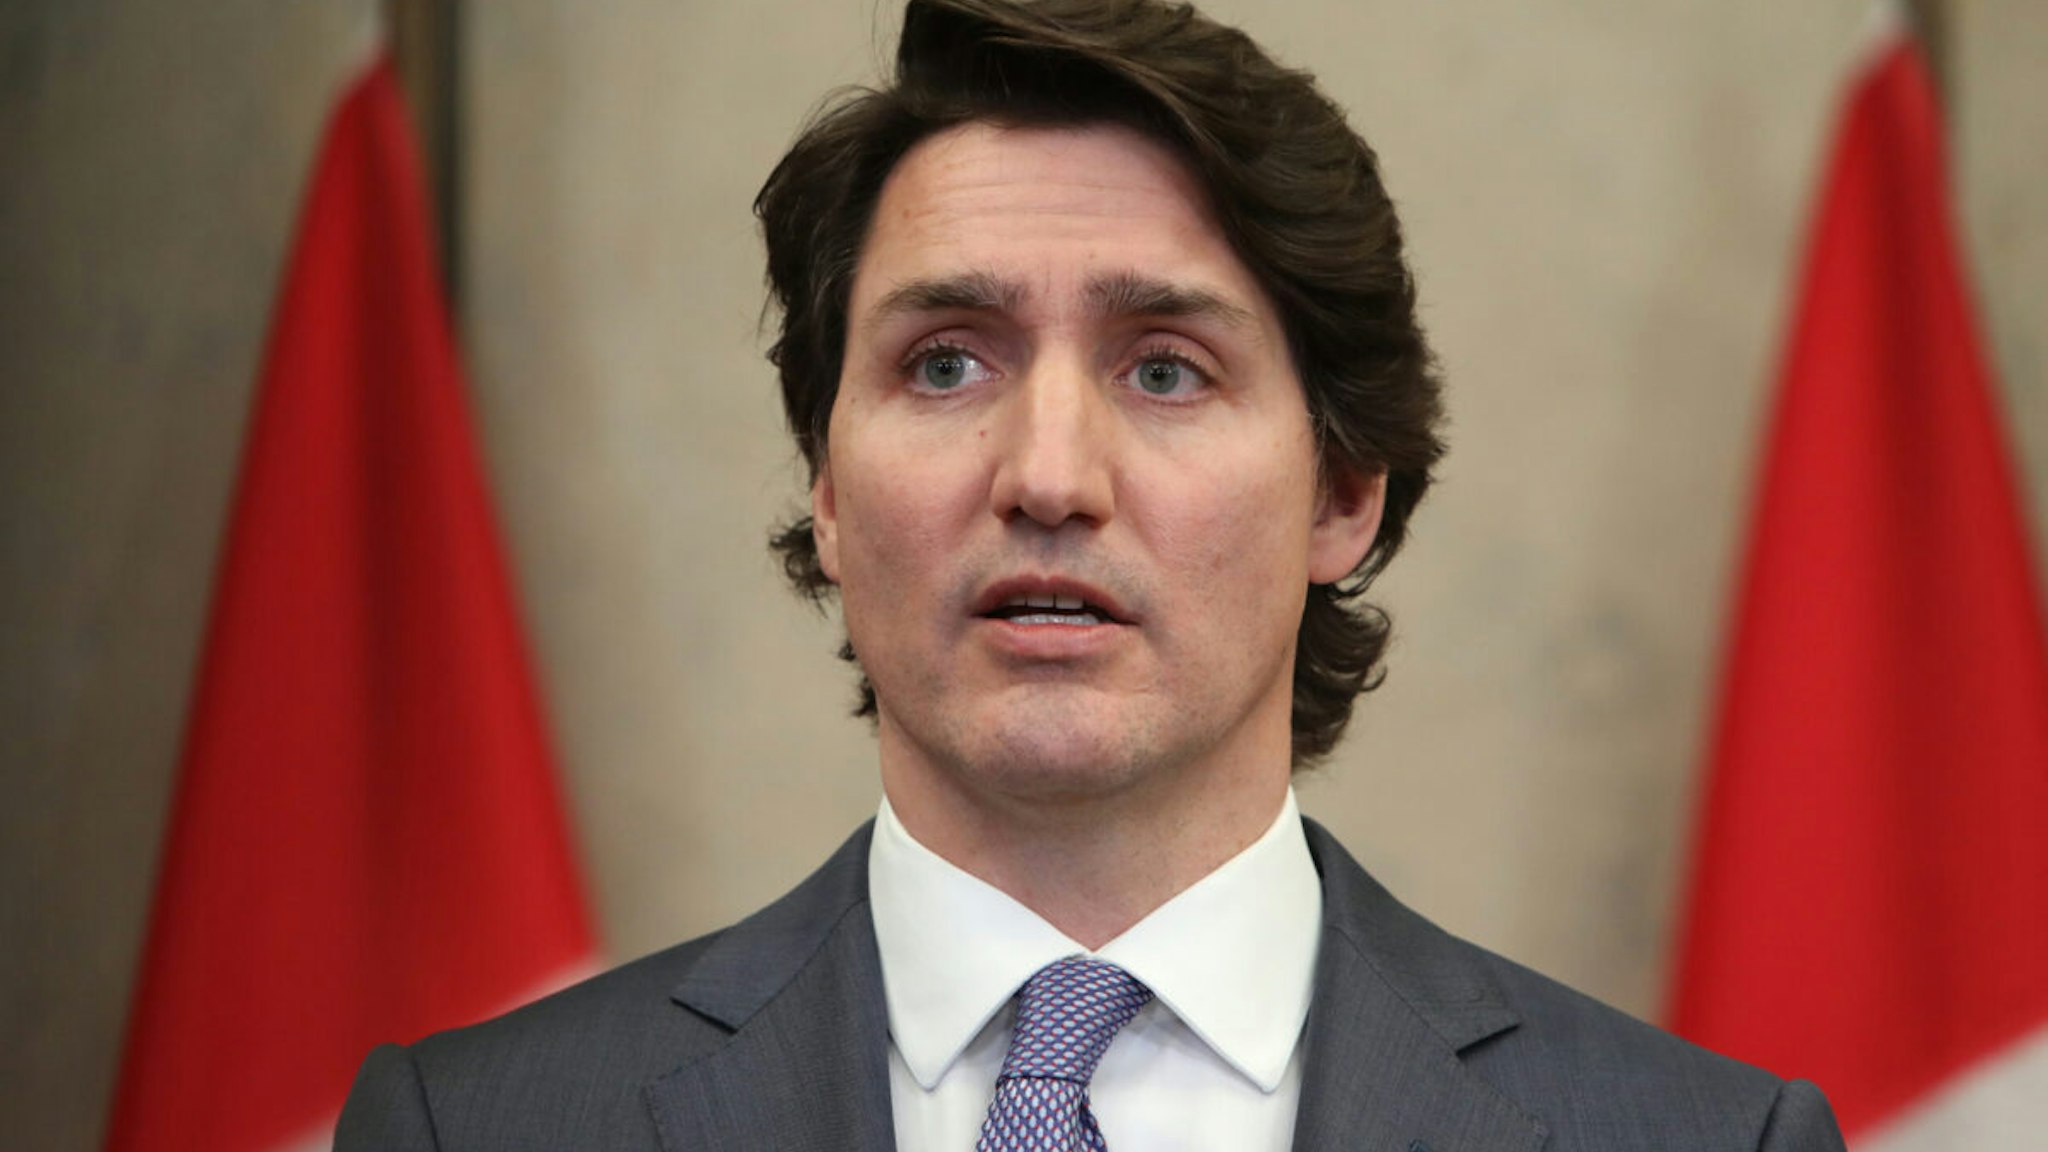 Justin Trudeau, Canada's prime minister, speaks during a news conference in Ottawa, Ontario, Canada, on Wednesday, Jan. 26, 2022